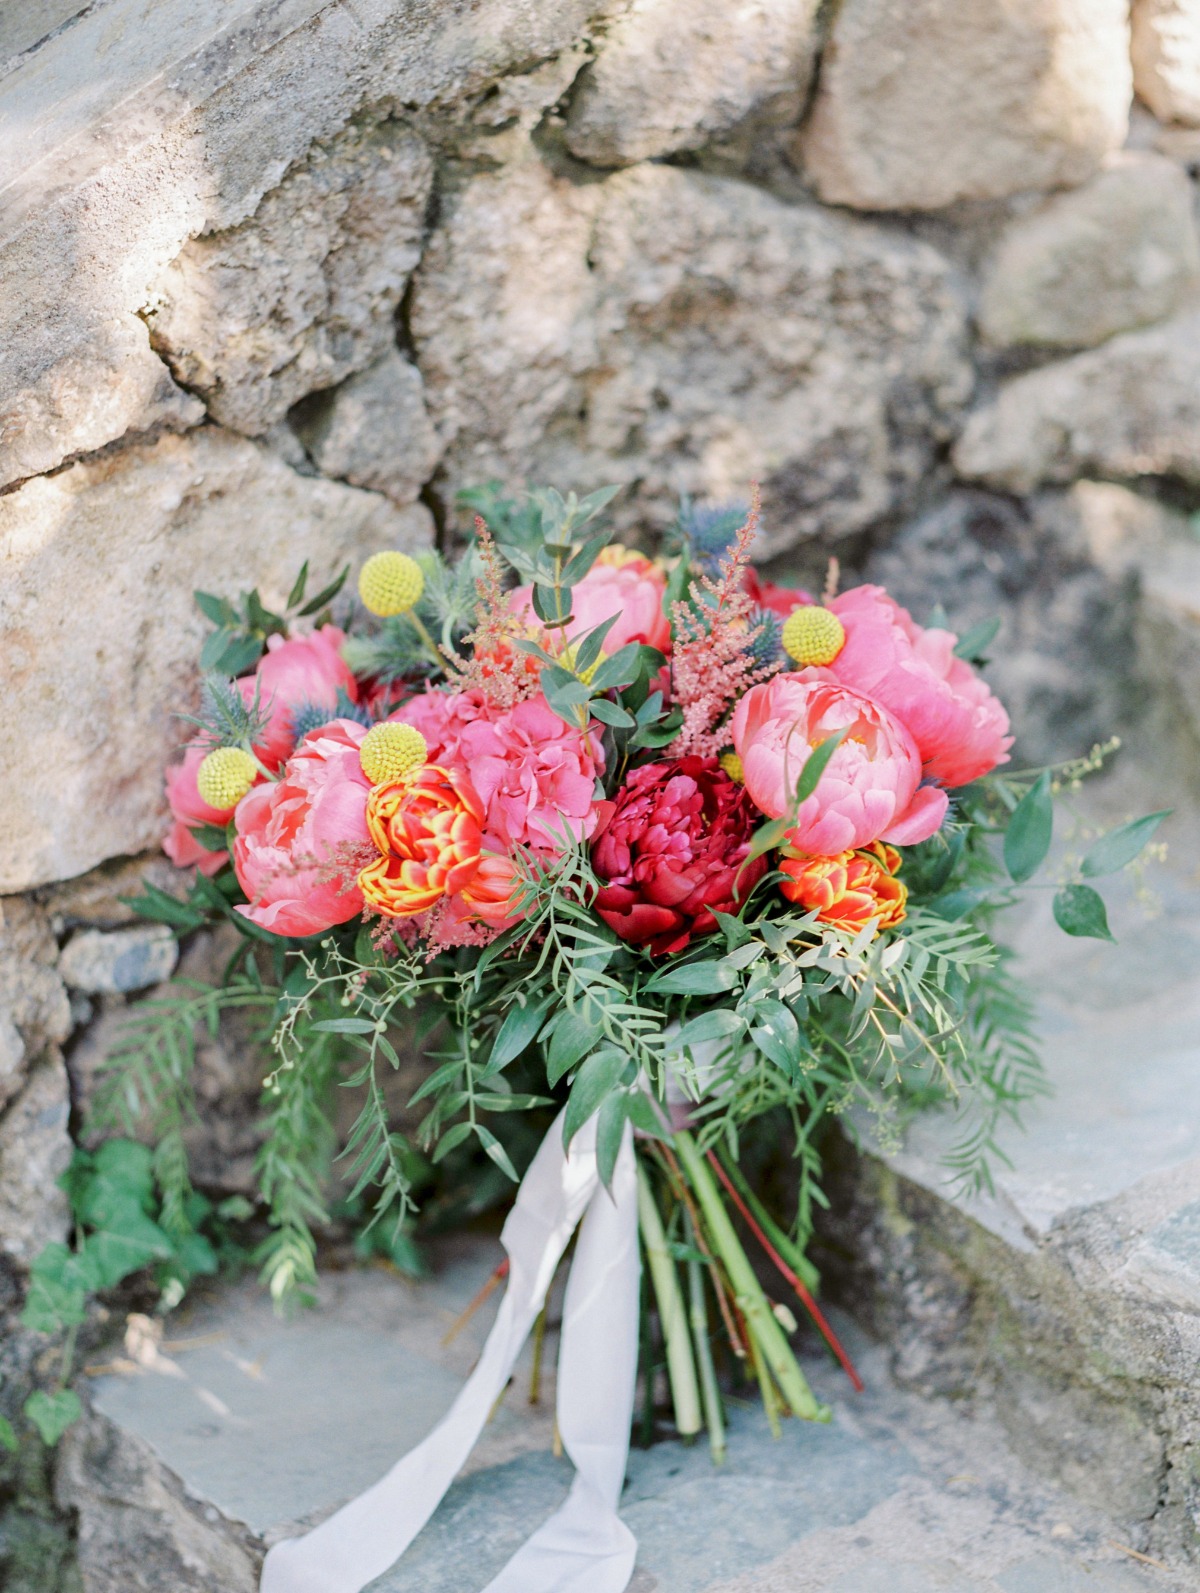 A Coastal Greek Wedding With A Boho Vibe In Pink And Blue